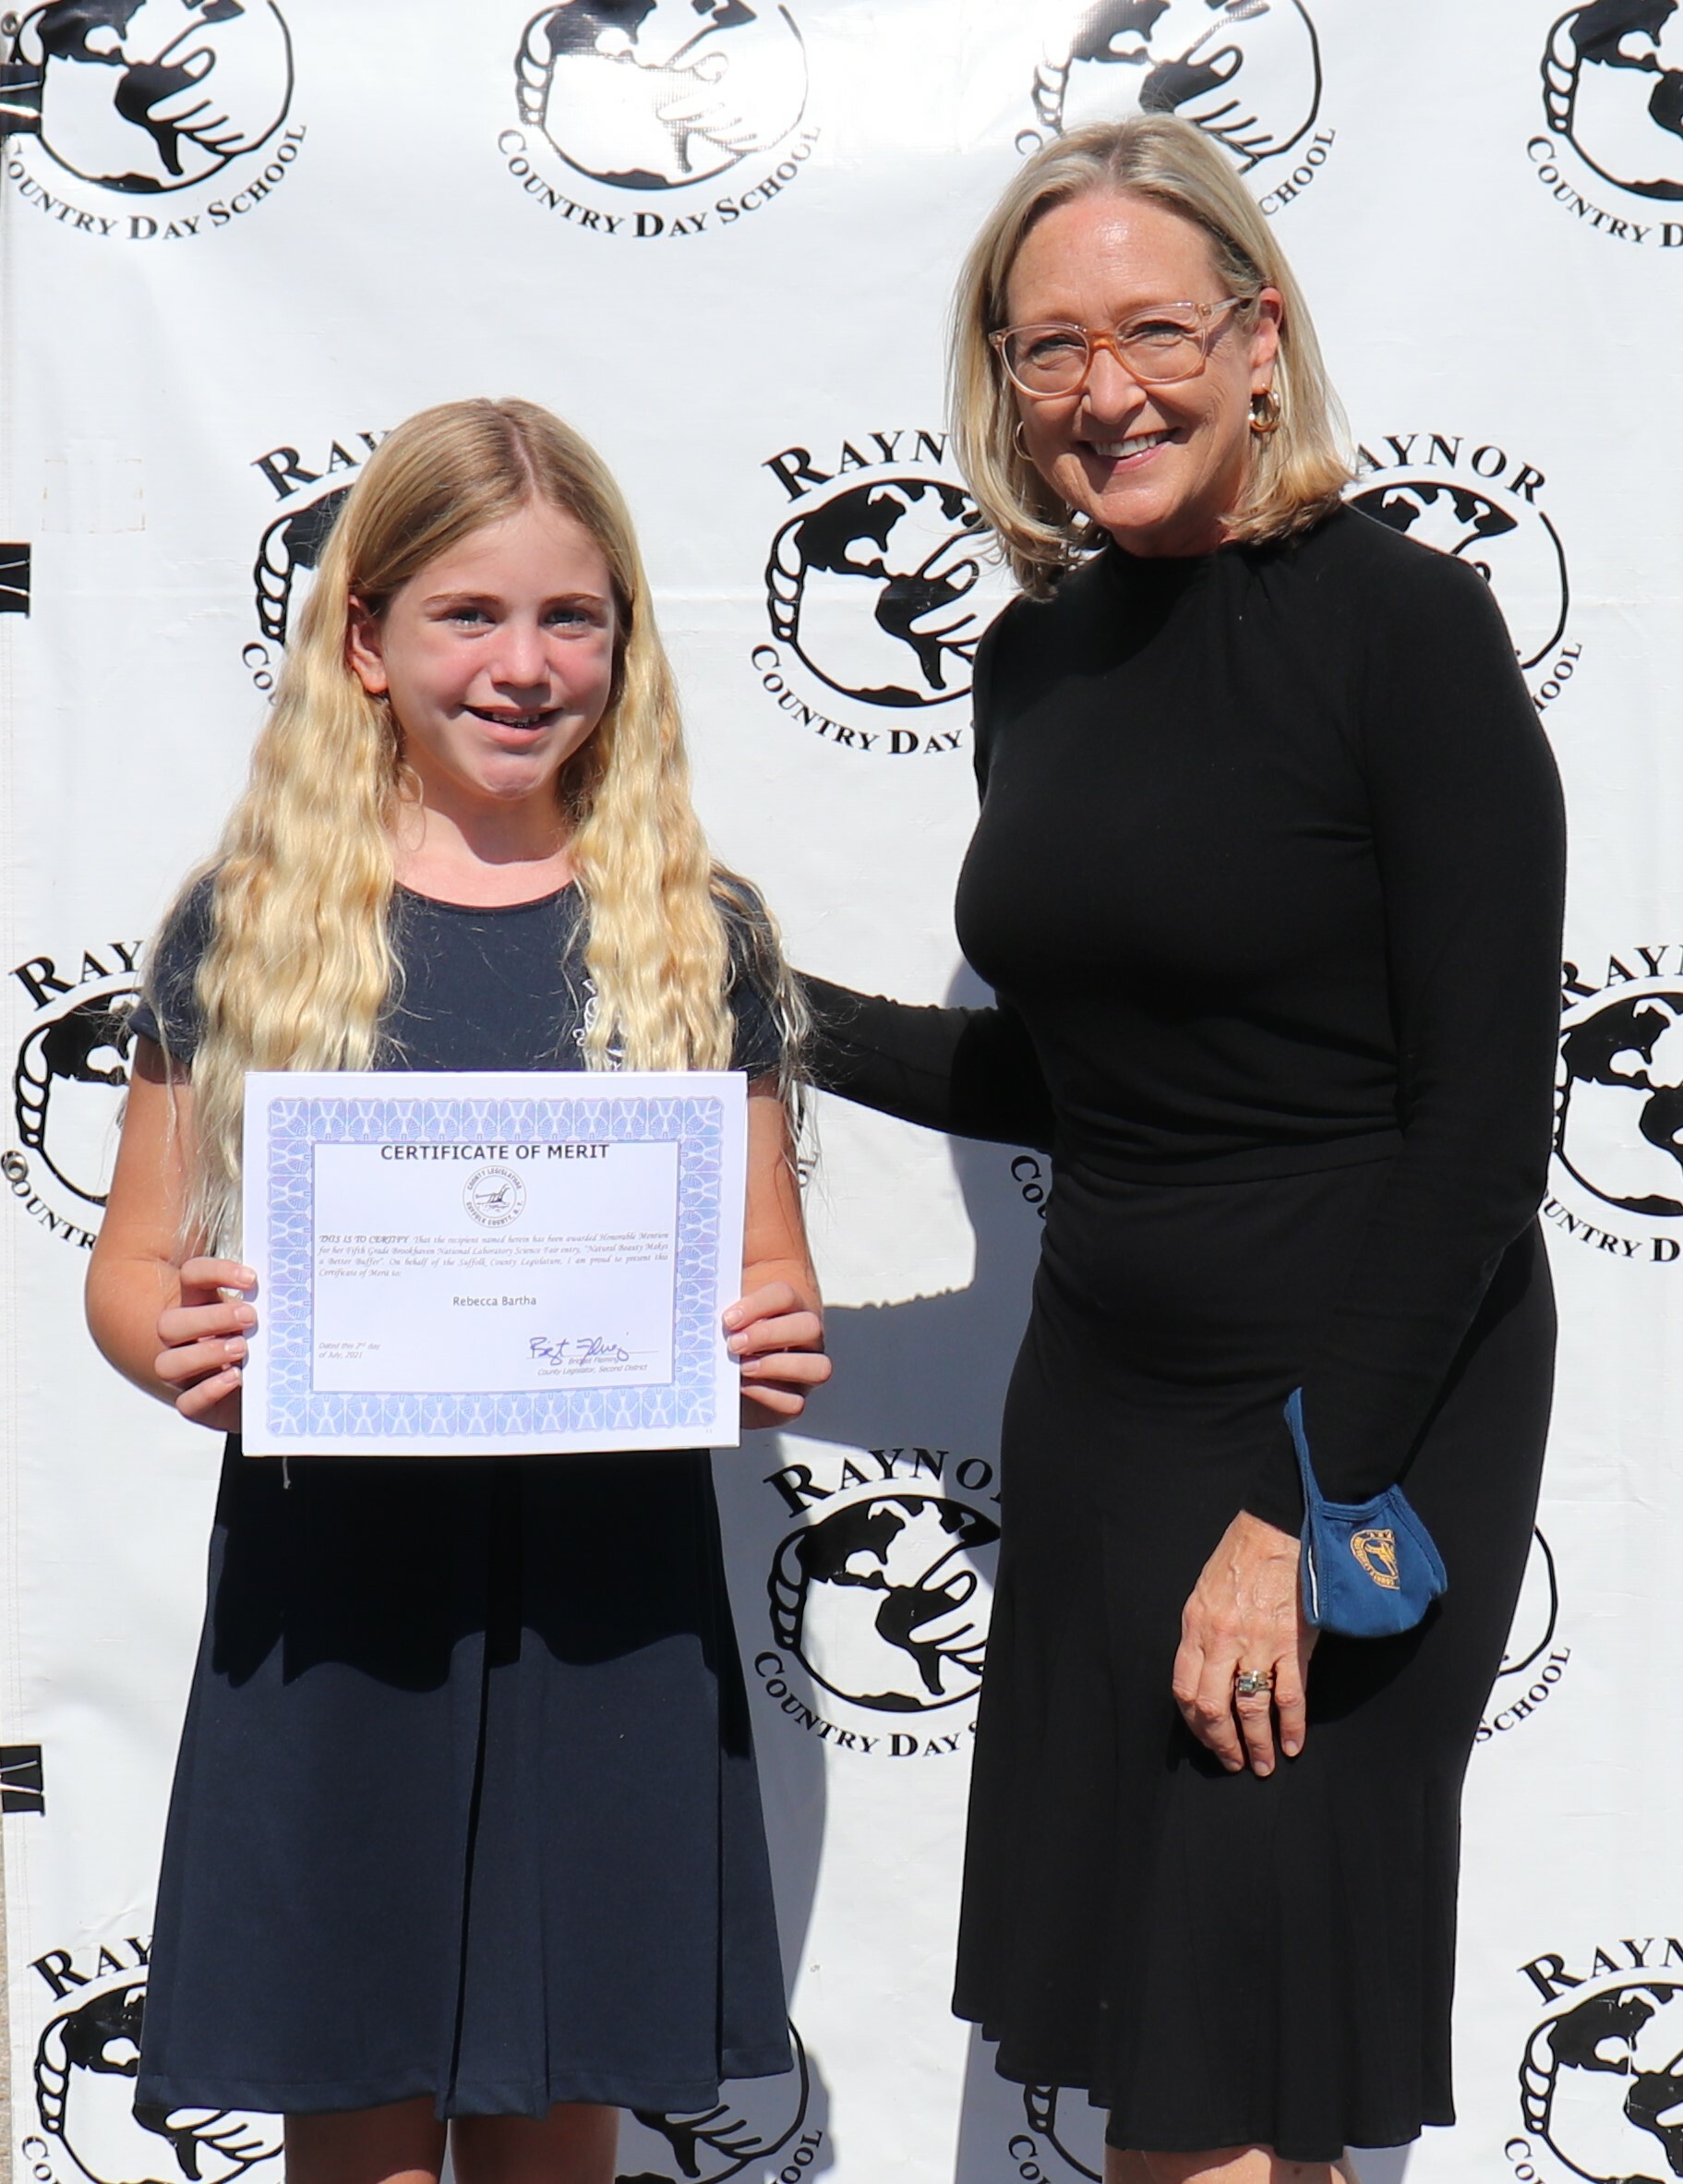 Suffolk County Legislator Bridget Fleming visited Raynor Country Day School last Friday, during which she presented student Rebecca Bartha with a certificate for her first-place and/or honorable mention in science contests at the Brookhaven National Lab over the last six  years.  Rebecca's projects continue to target a scientific approach to local environmental problems.